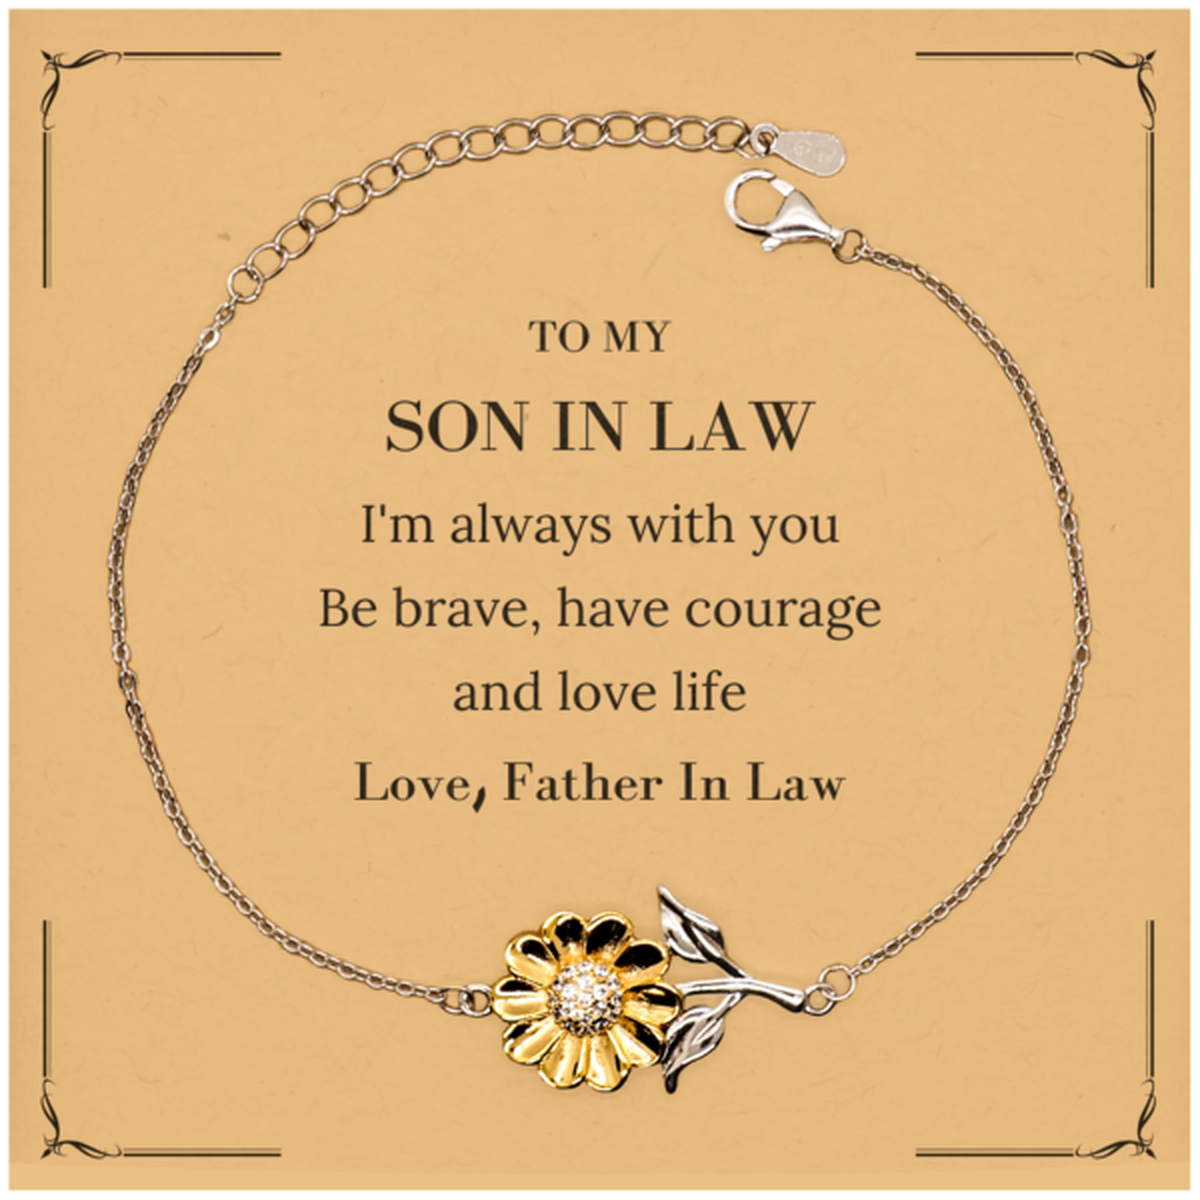 To My Son In Law Gifts from Father In Law, Unique Sunflower Bracelet Inspirational Christmas Birthday Graduation Gifts for Son In Law I'm always with you. Be brave, have courage and love life. Love, Father In Law